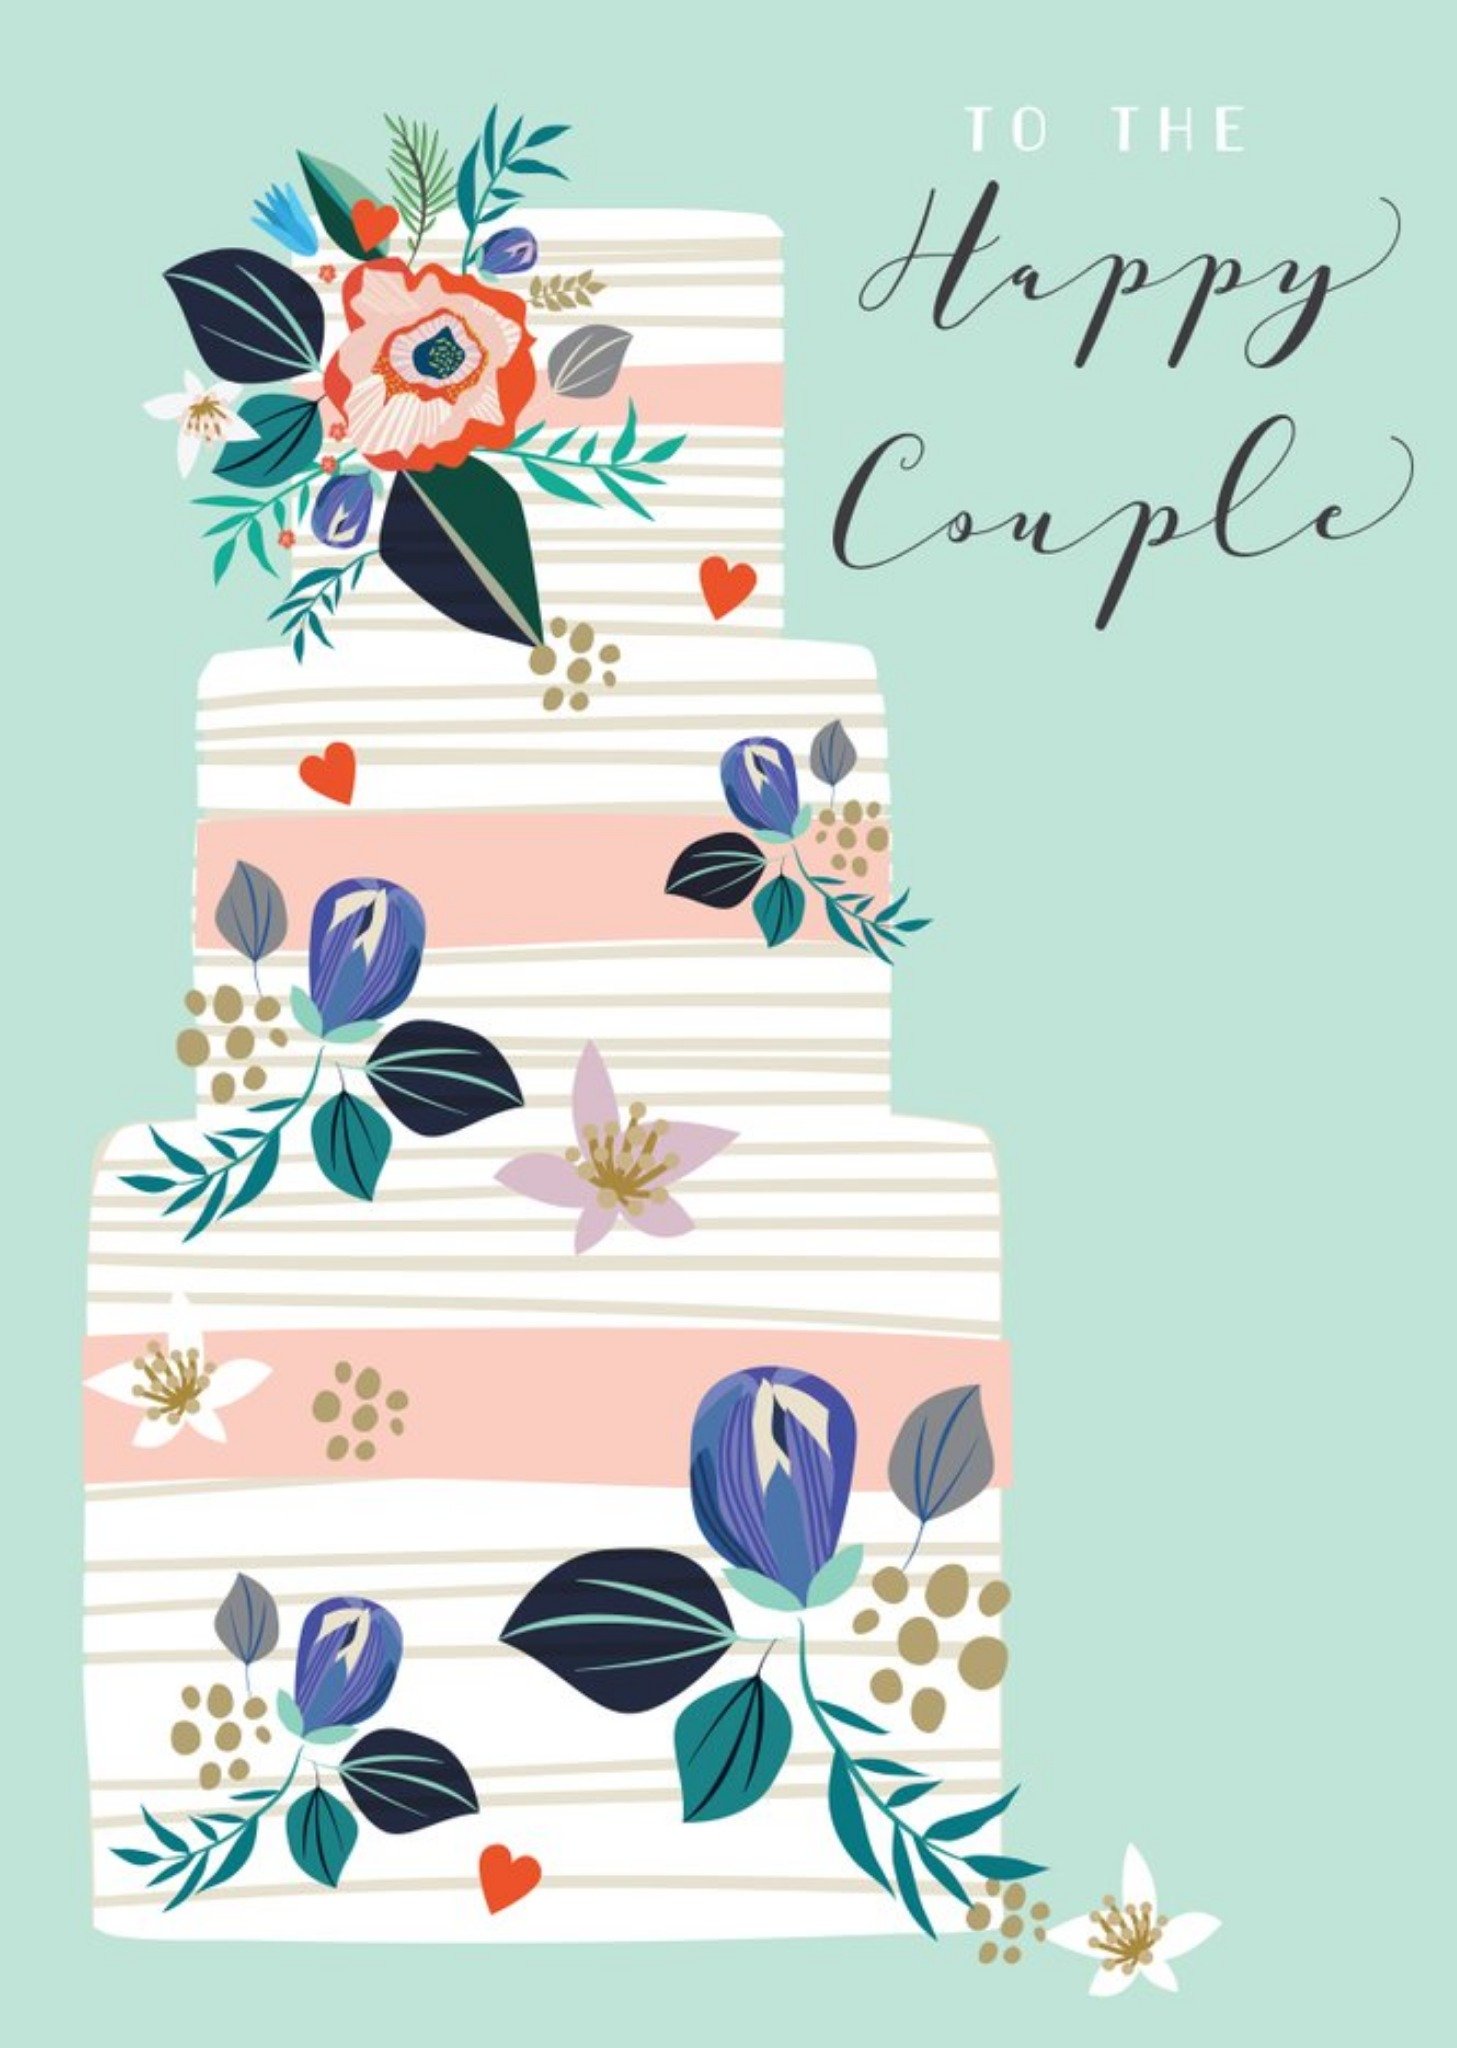 Moonpig Illustrated Tiered Floral Wedding Cake To The Happy Couple Card, Large